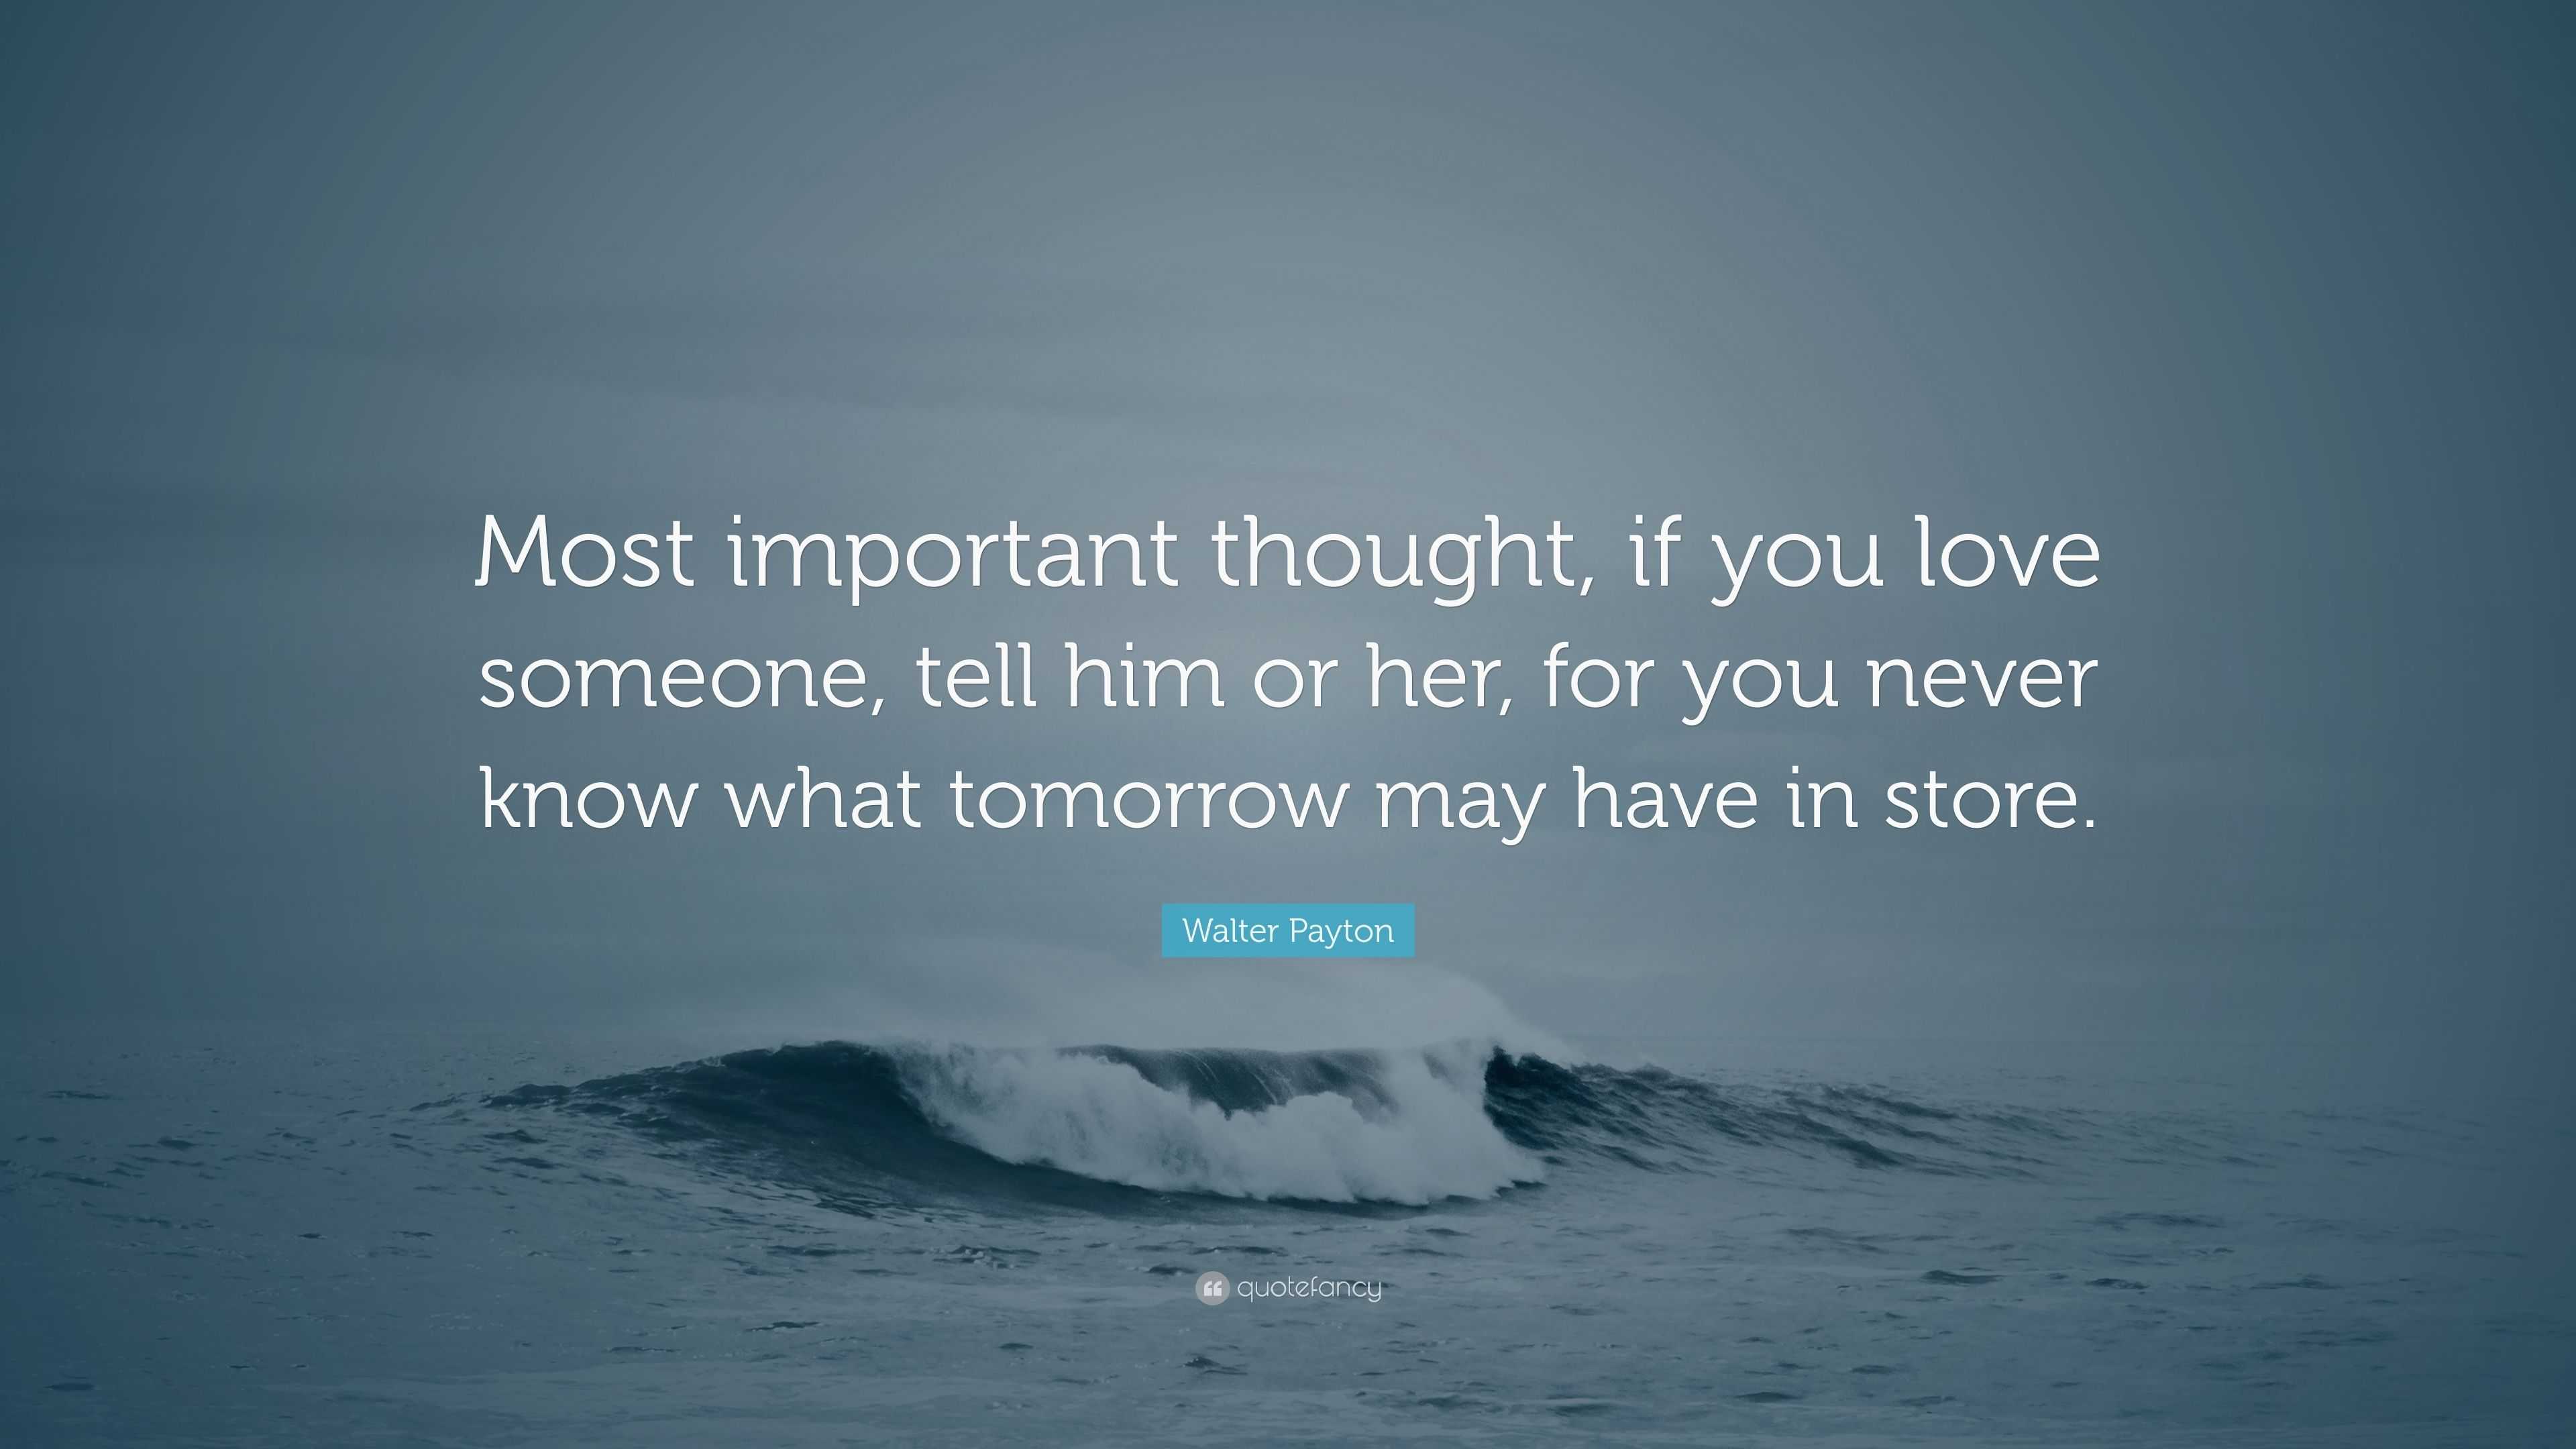 Walter Payton Quote “Most important thought if you love someone tell him